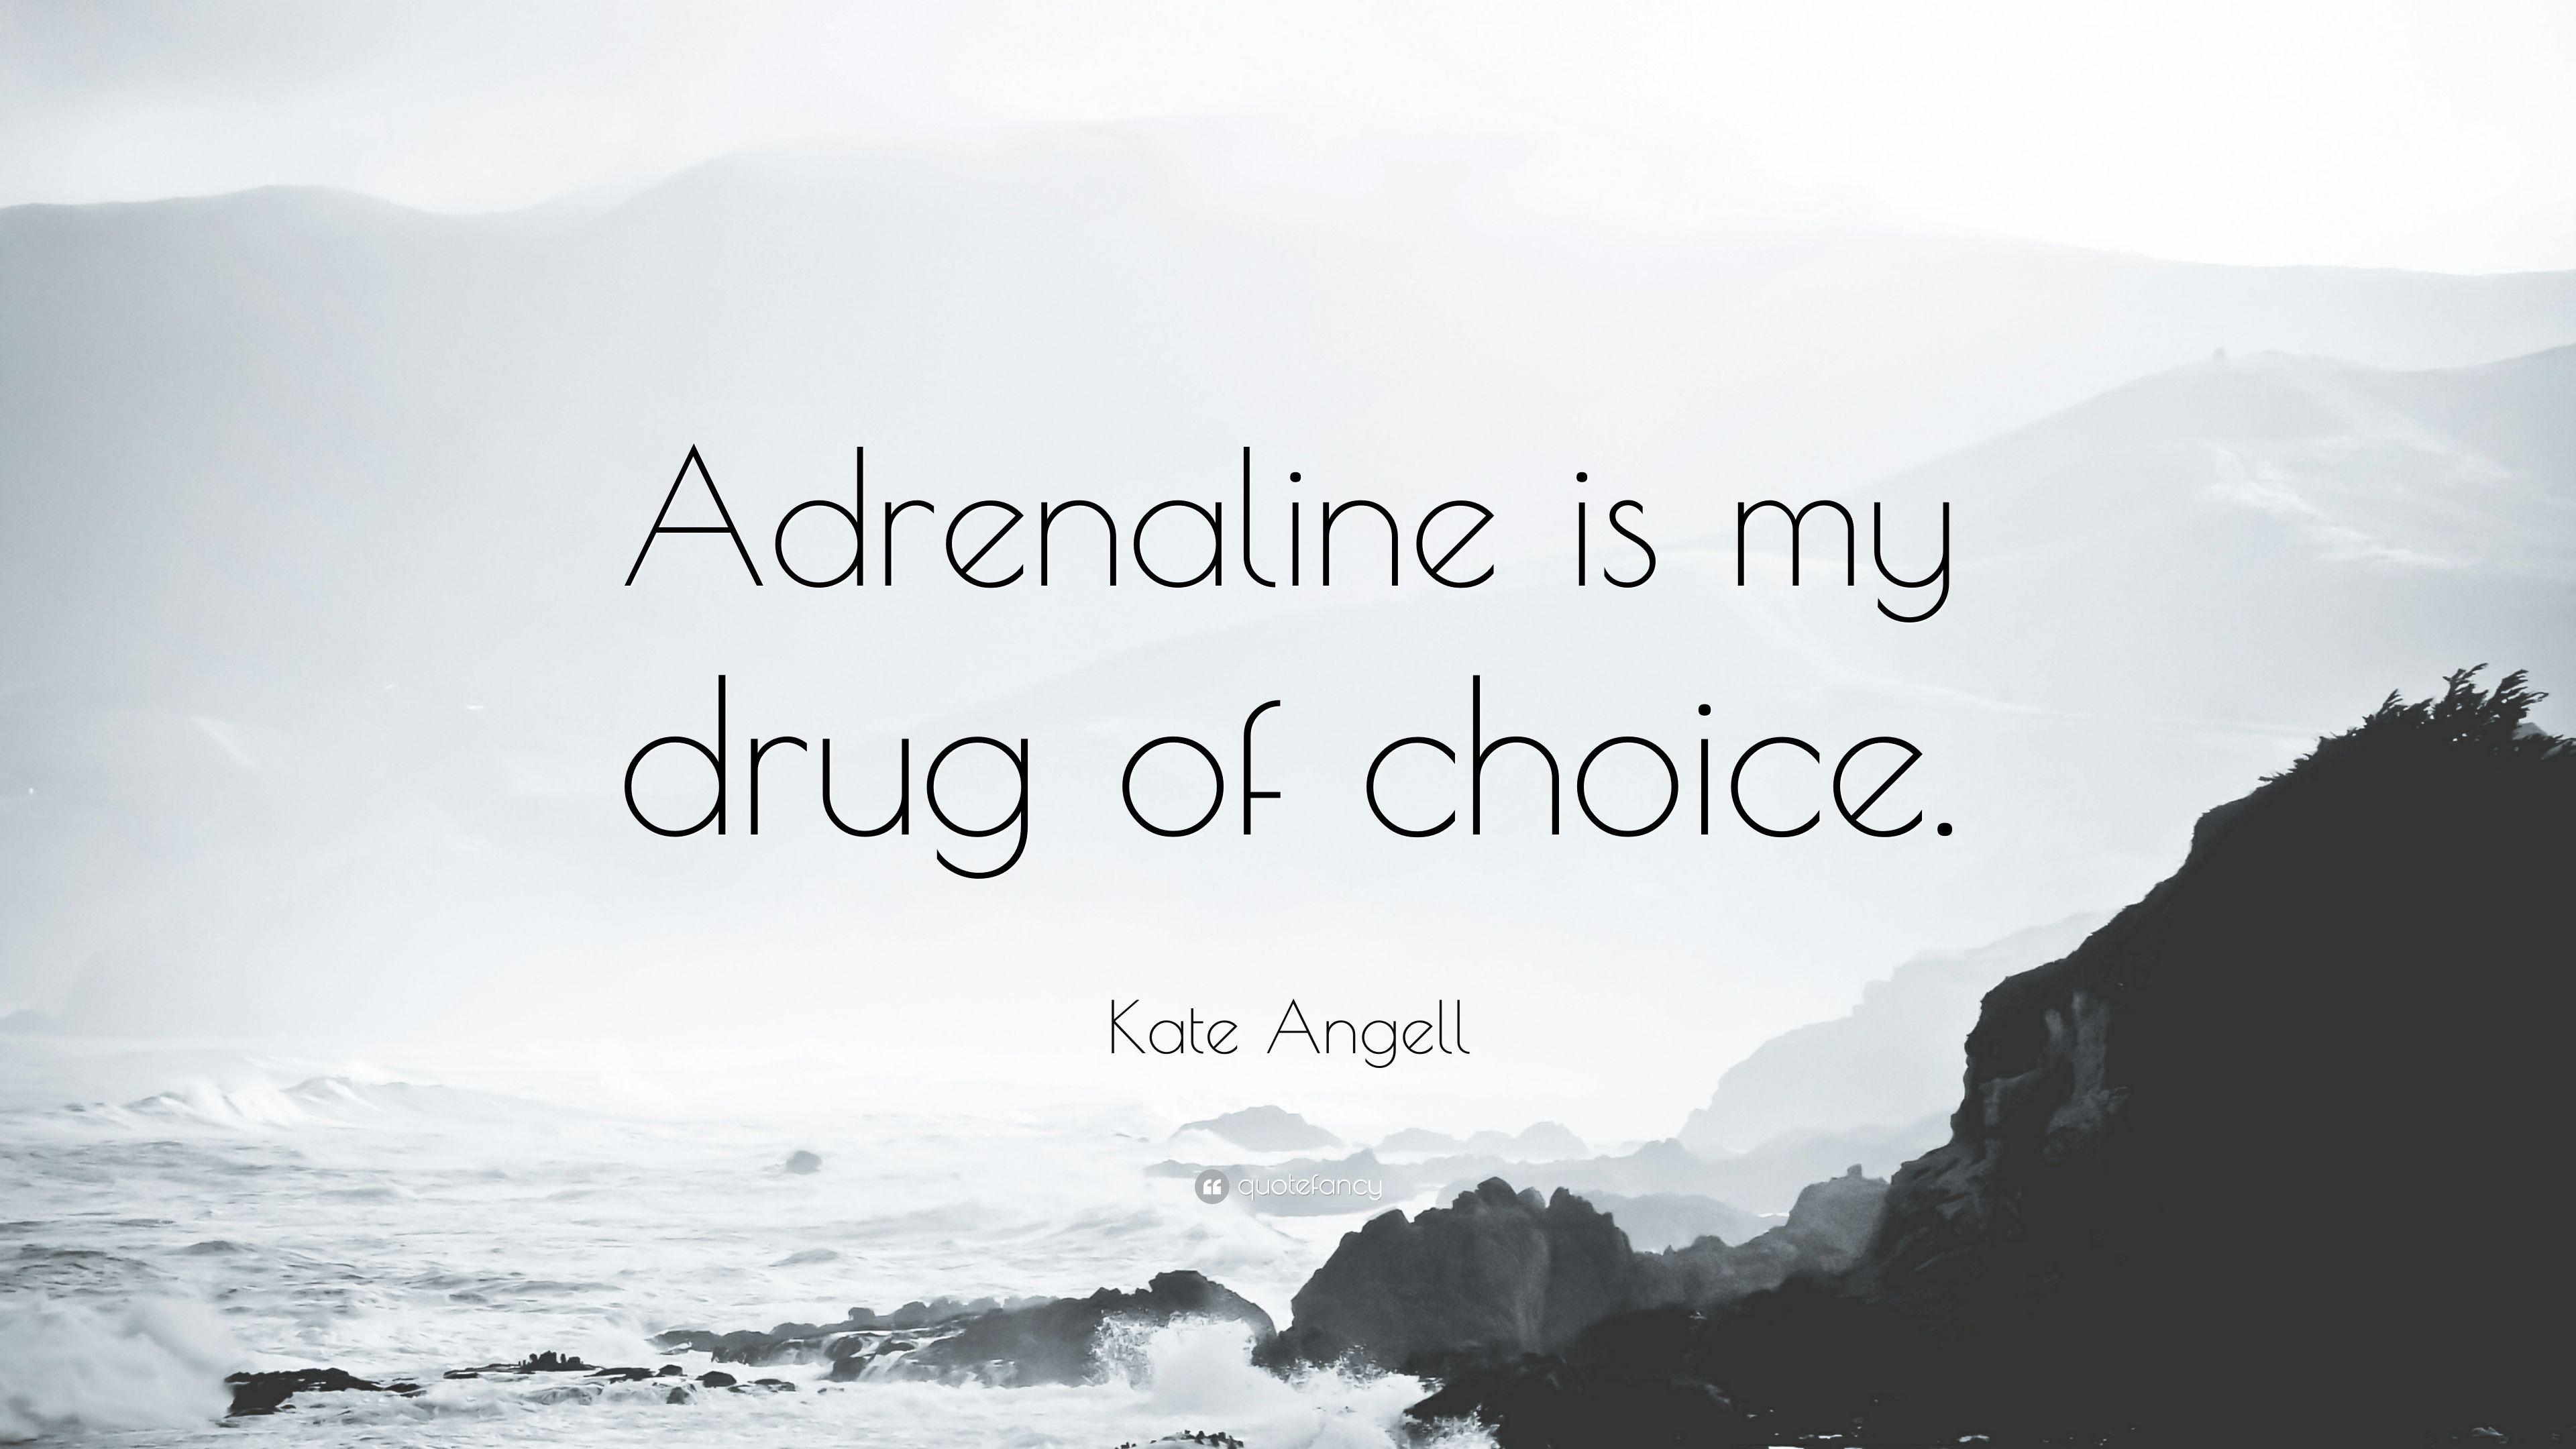 Kate Angell Quote: “Adrenaline is my drug of choice.” 12